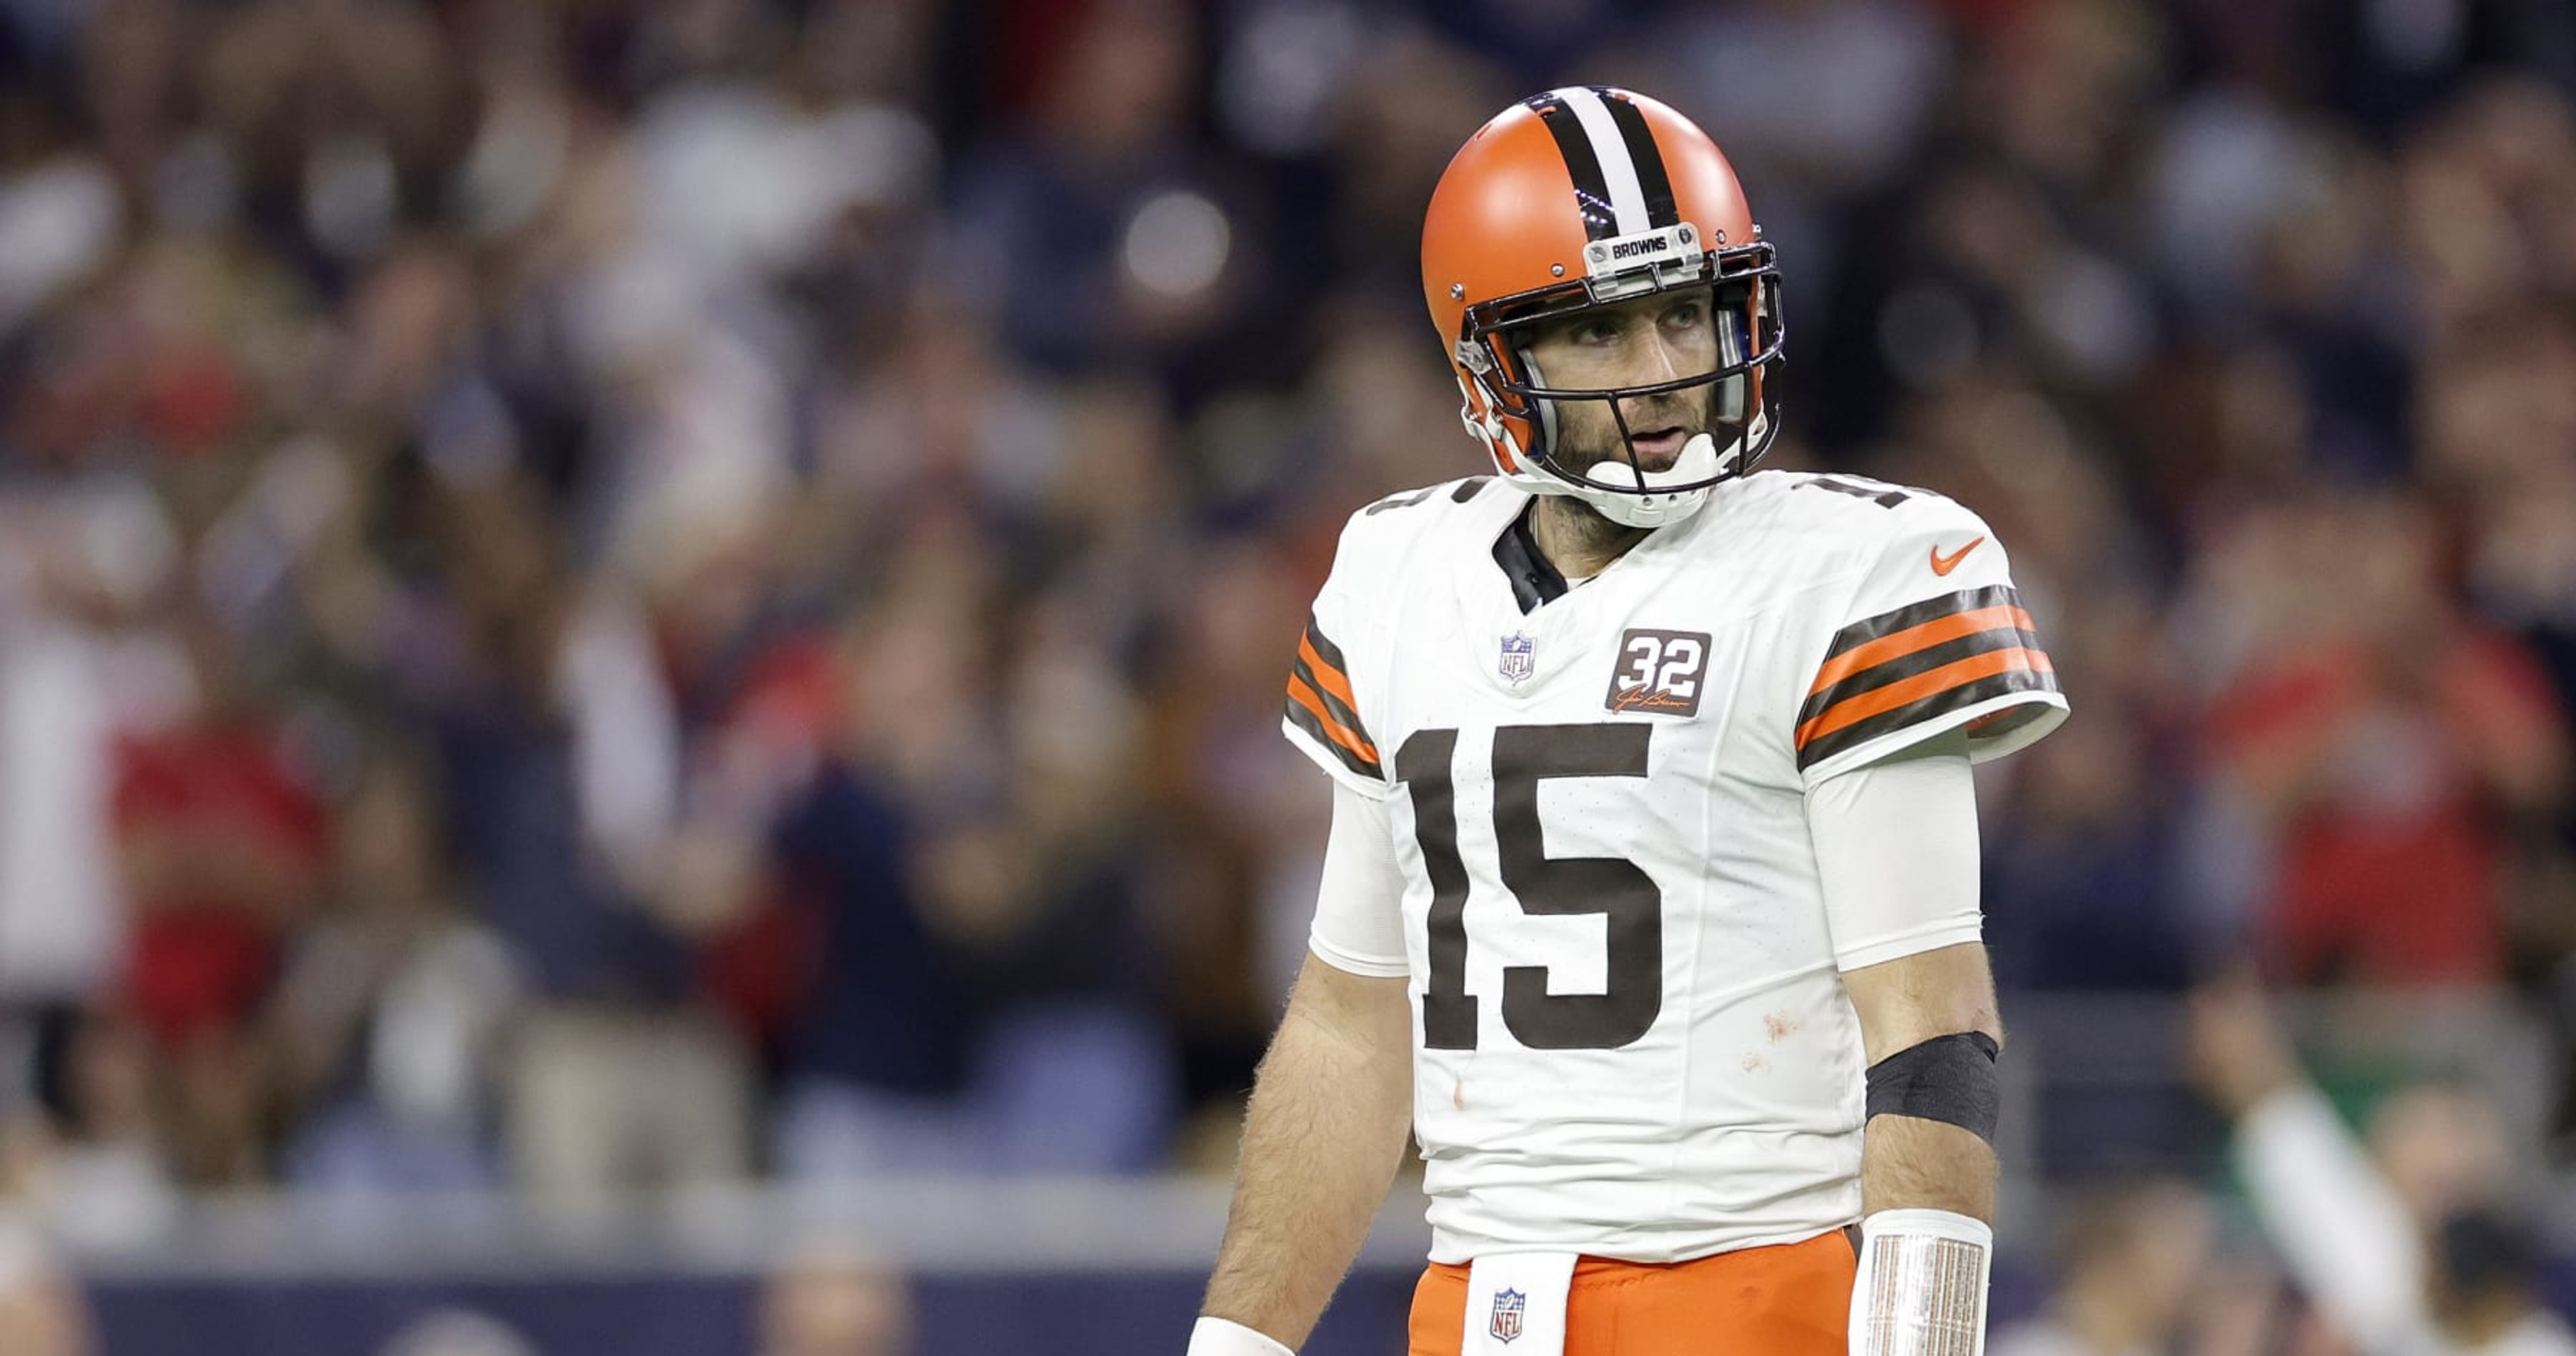 Joe Flacco 'Super Grateful' for Browns Run but 'Stinks the Way It Ended' vs. Texans